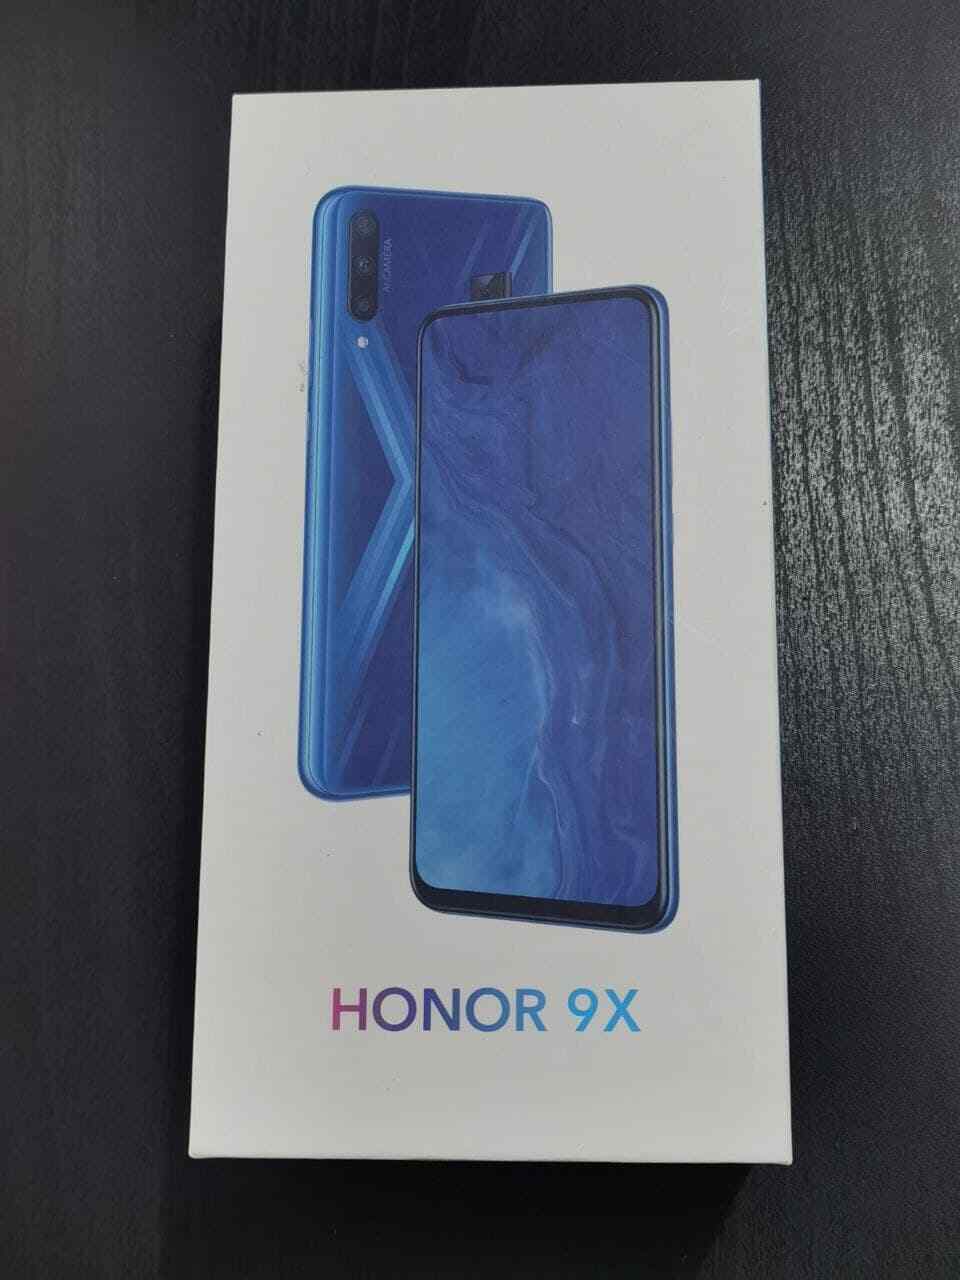 HUAWEI Honor 9X 6.59" 6GB+128GB Android 4G Smartphone Unlocked -Brand New